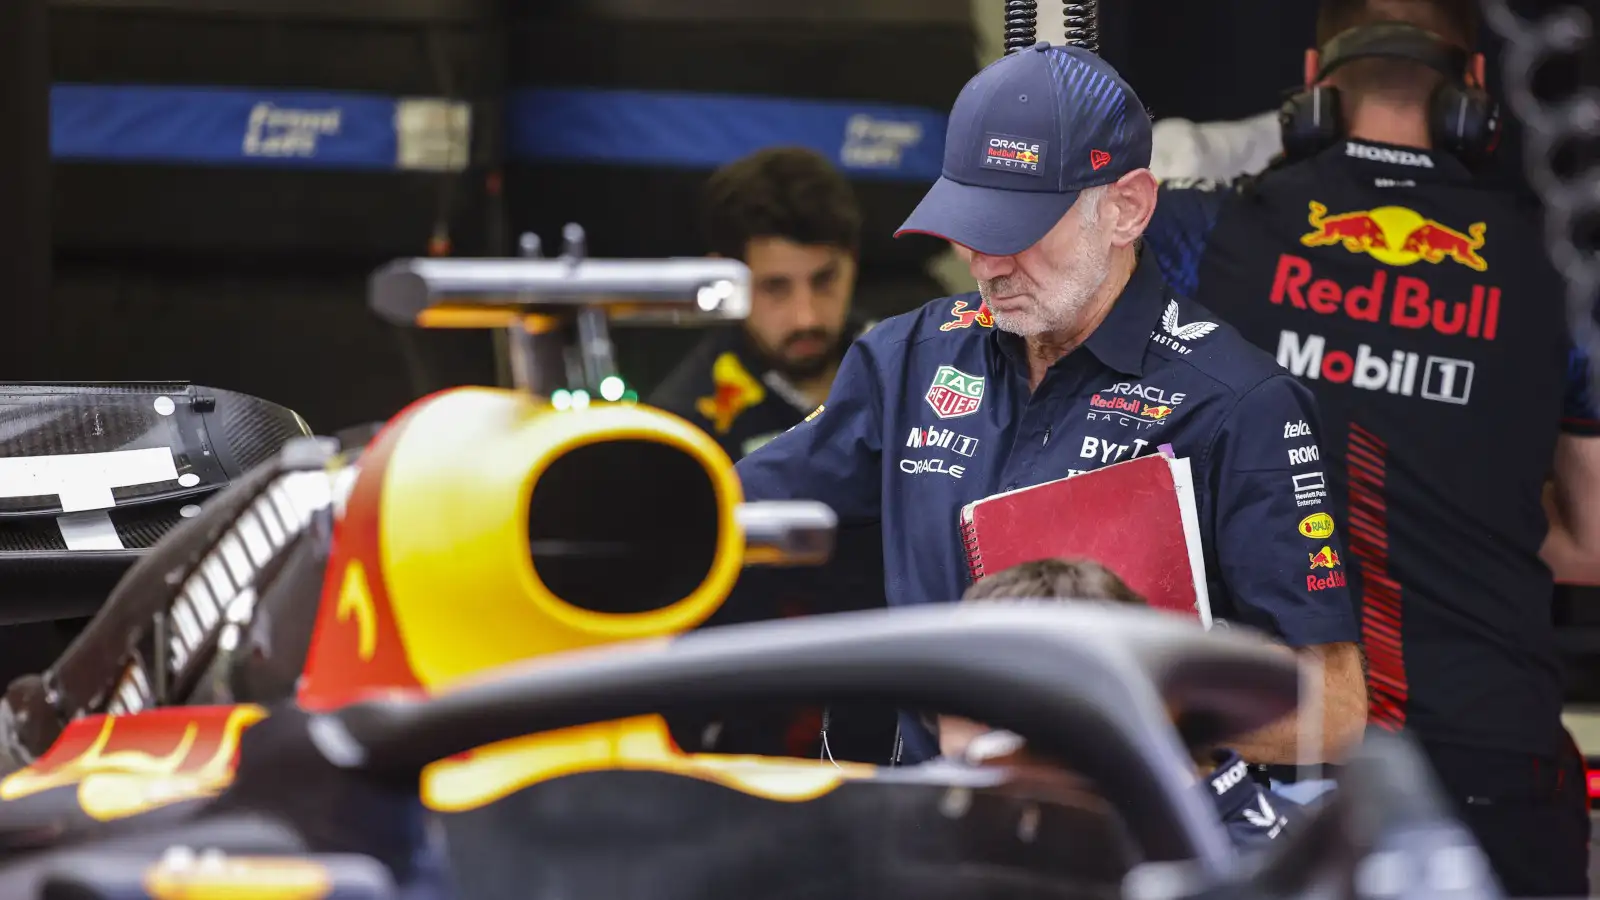 Adrian Newey inspecting the RB19 with his notebook in hand.